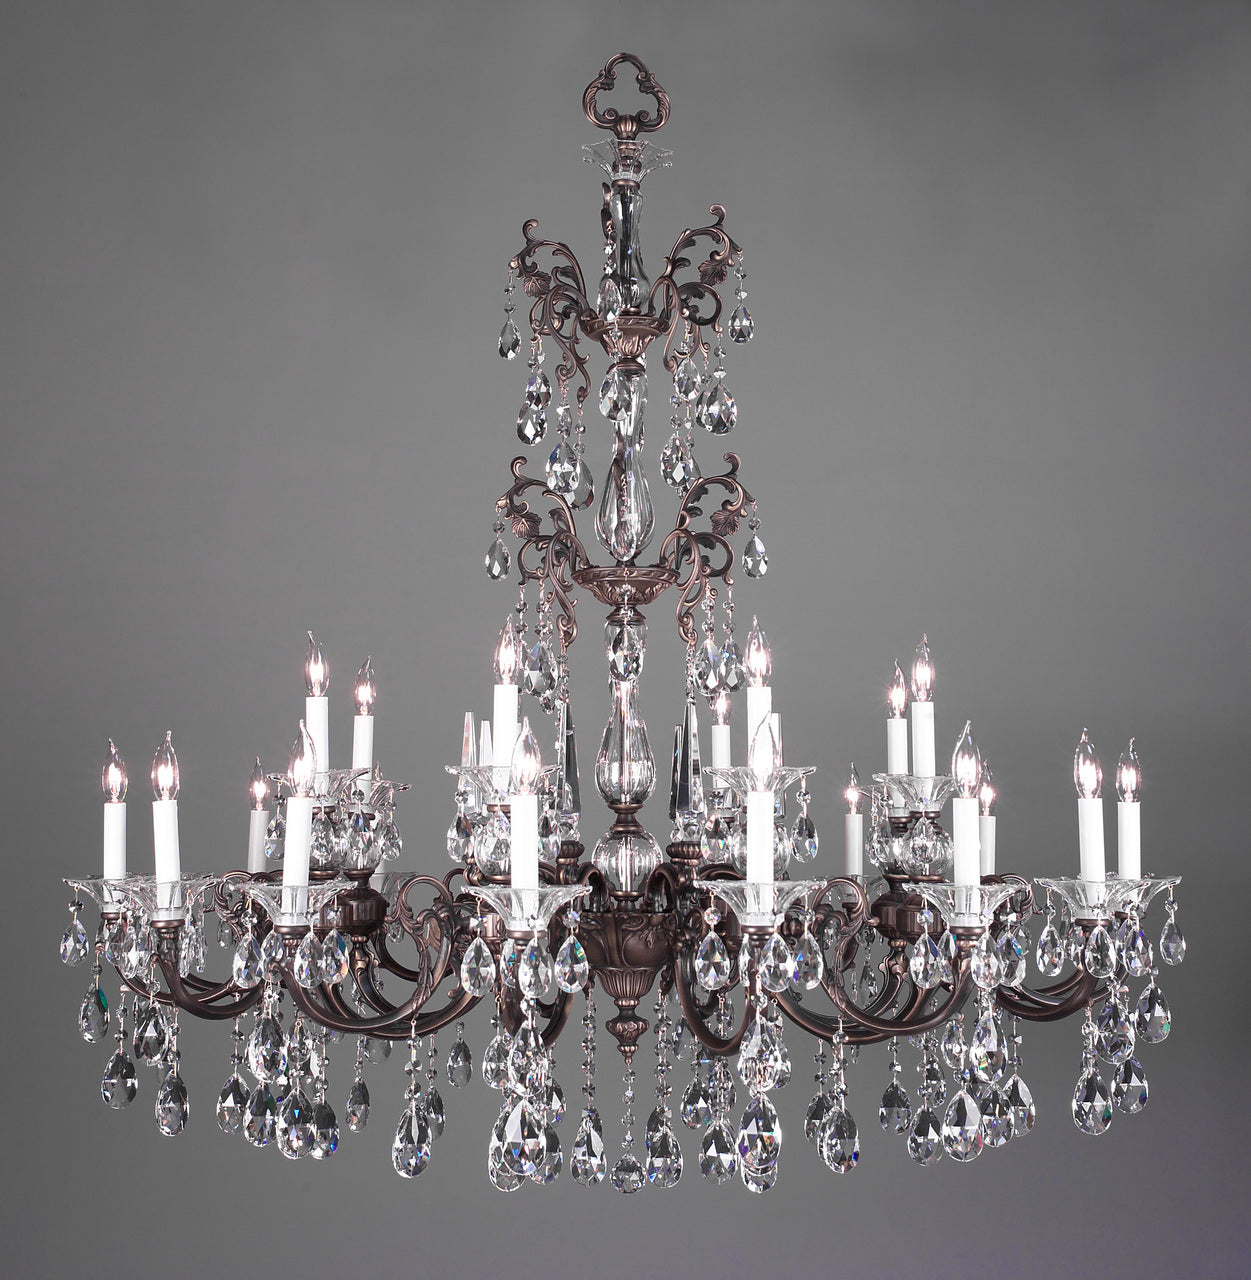 Classic Lighting 57065 RB CGT Via Lombardi Crystal Chandelier in Roman Bronze (Imported from Spain)